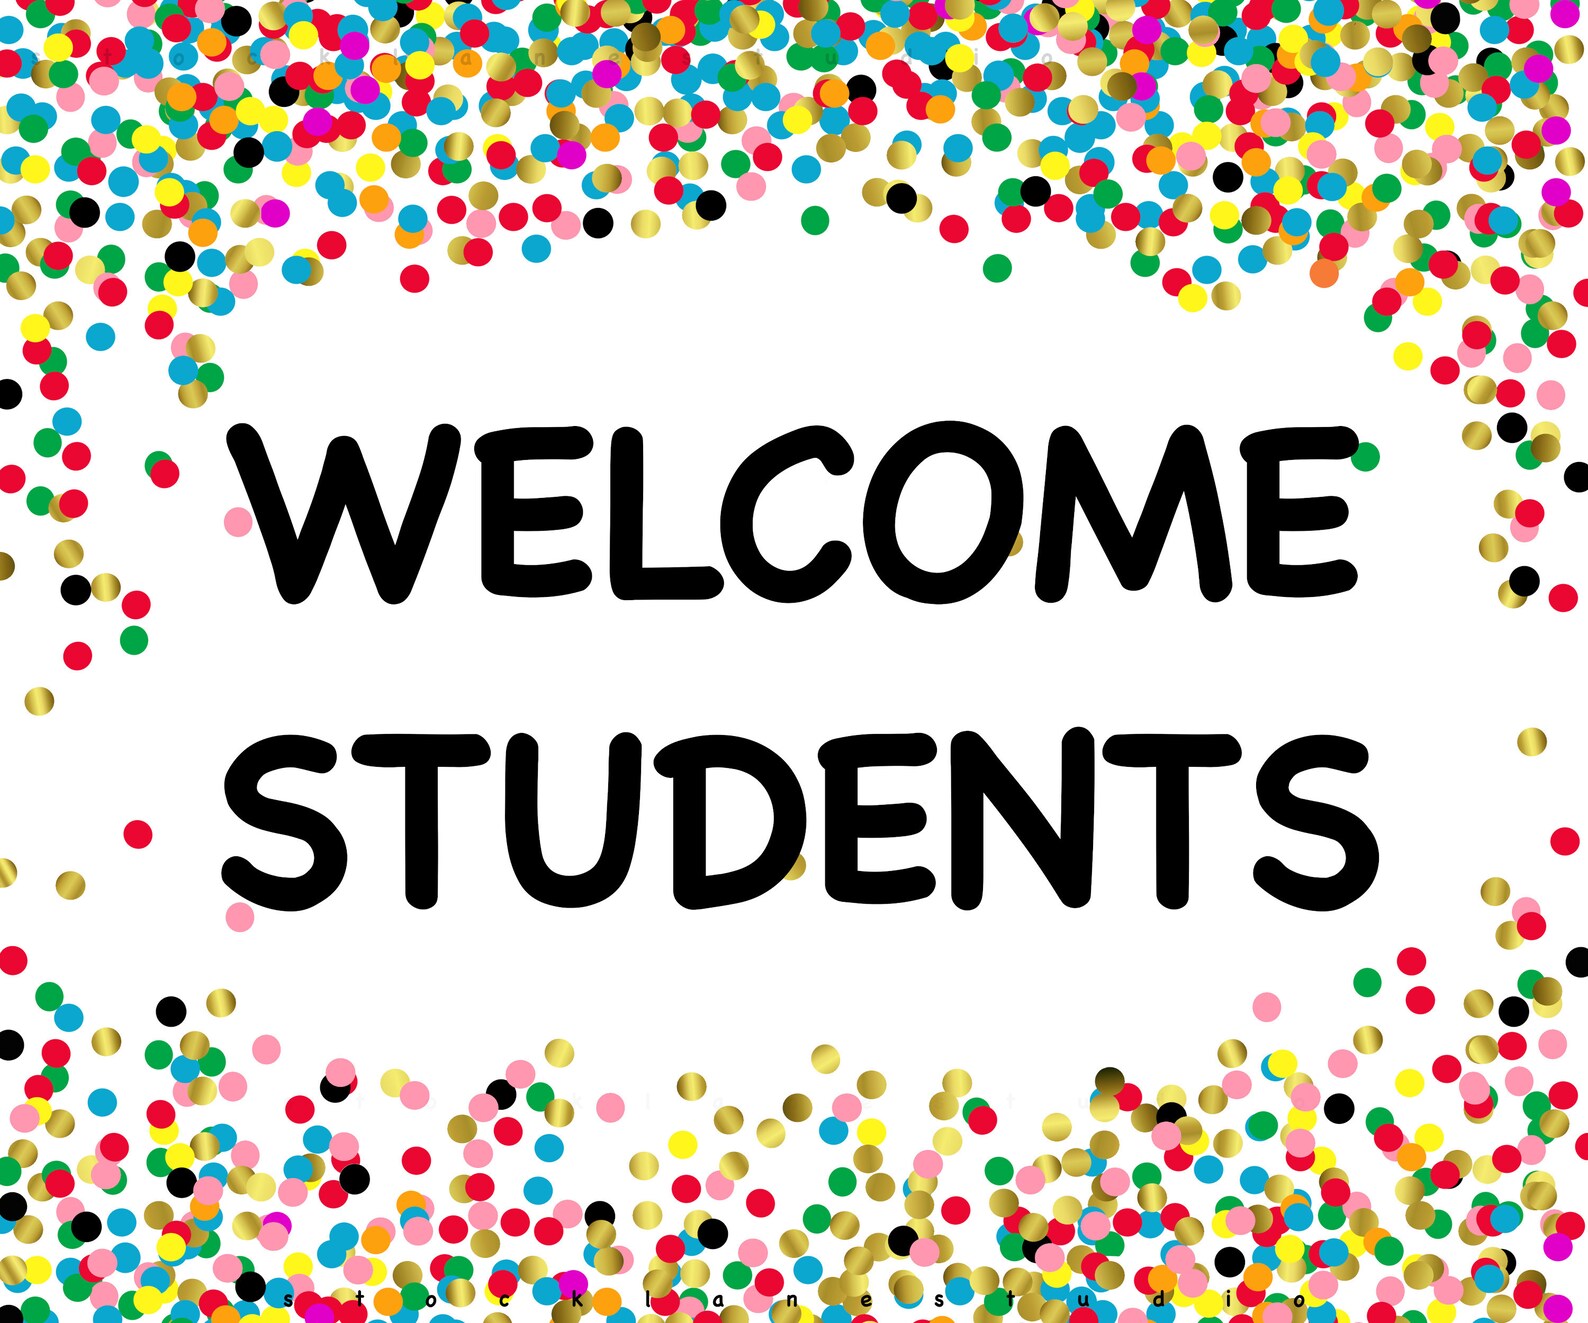 Welcome students